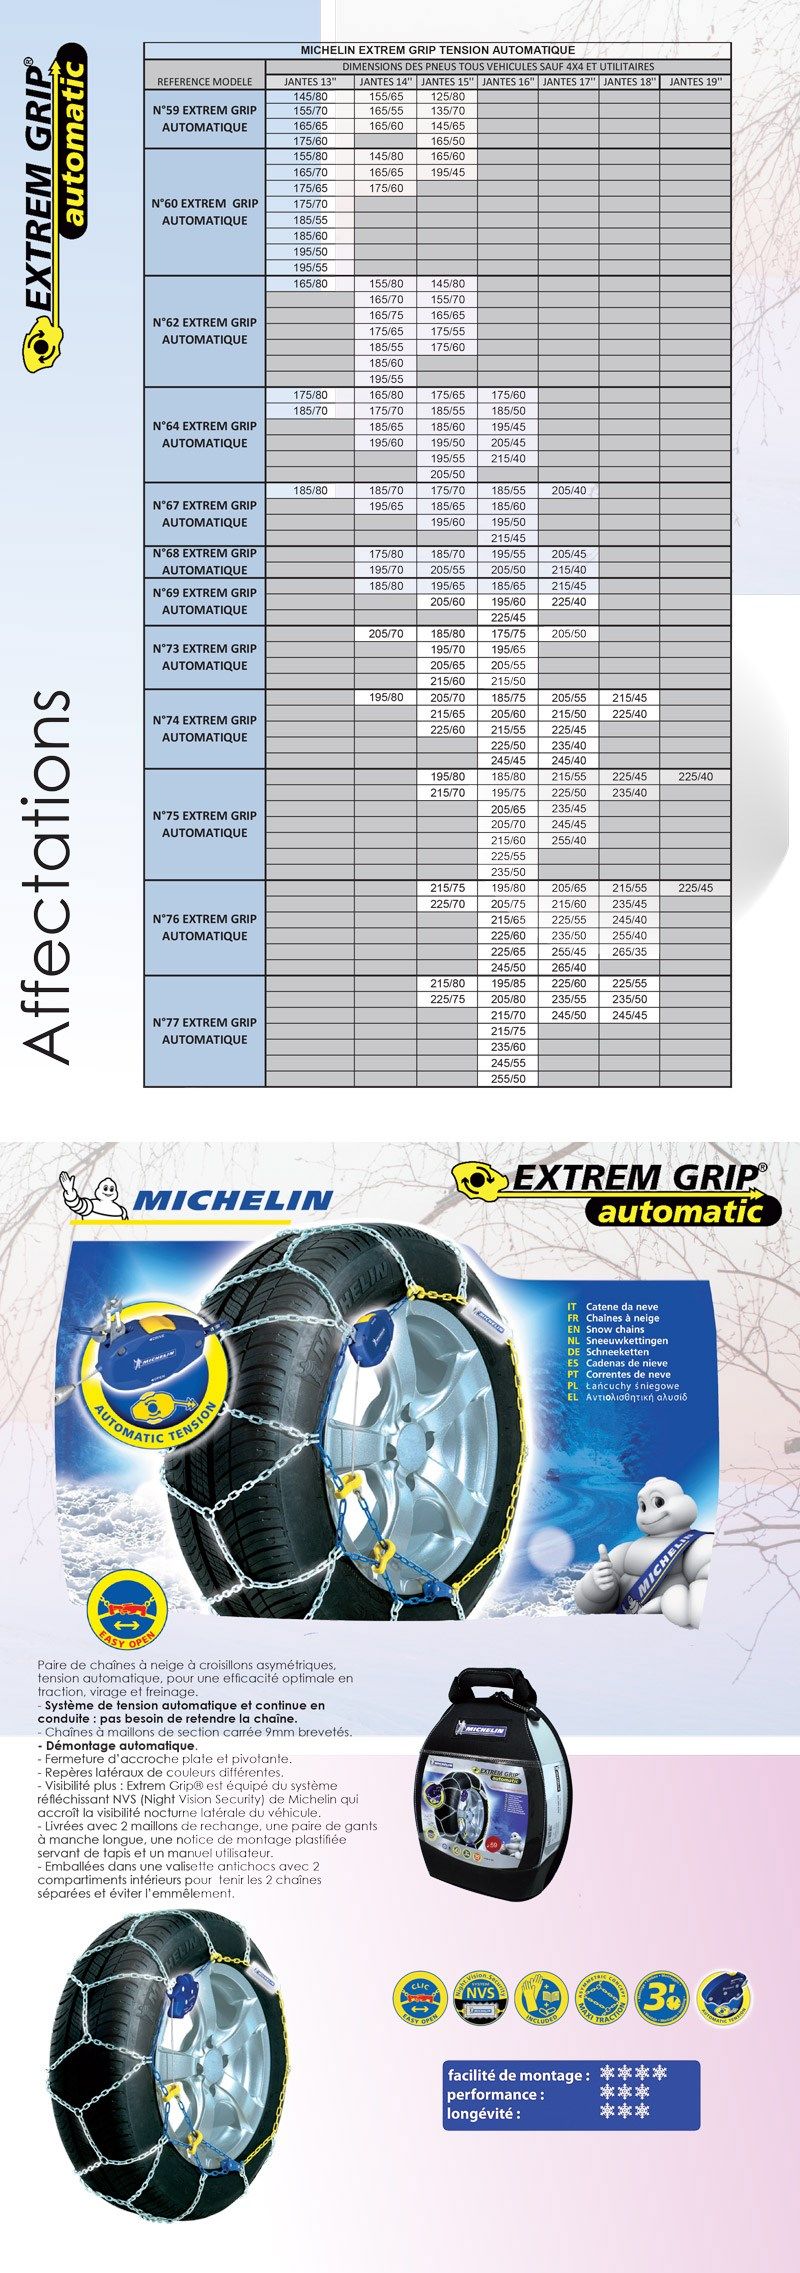 MICHELIN Chaines neige Extrem Grip® Automatic